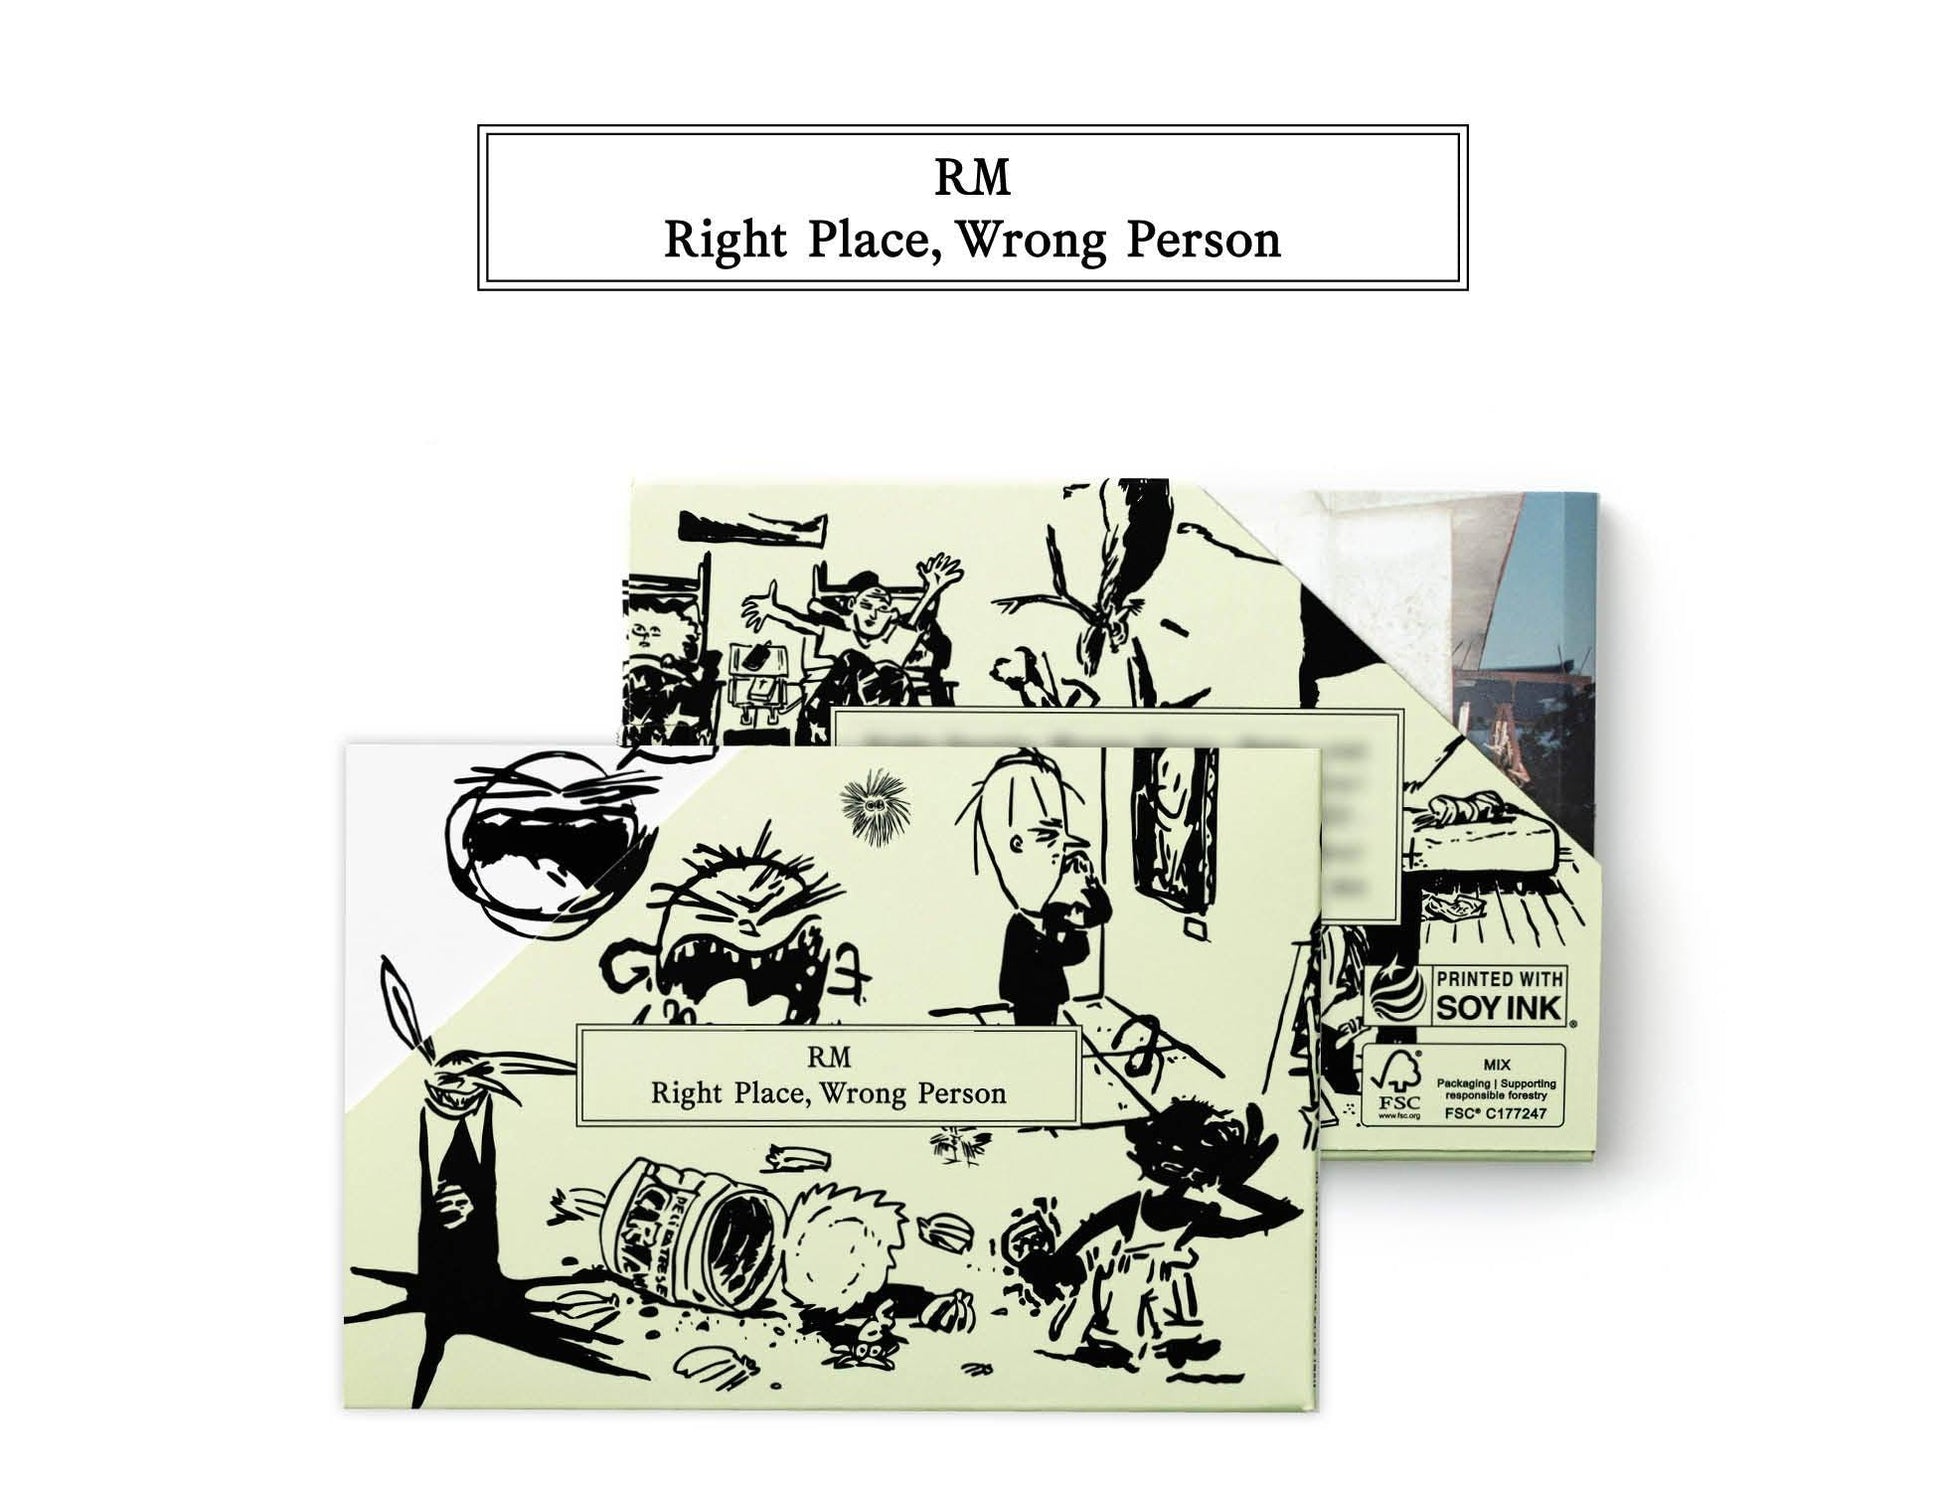 [PRE ORDER] RM - [Right Place, Wrong People] (Weverse Albums Ver.) - KAEPJJANG SHOP (캡짱 숍)